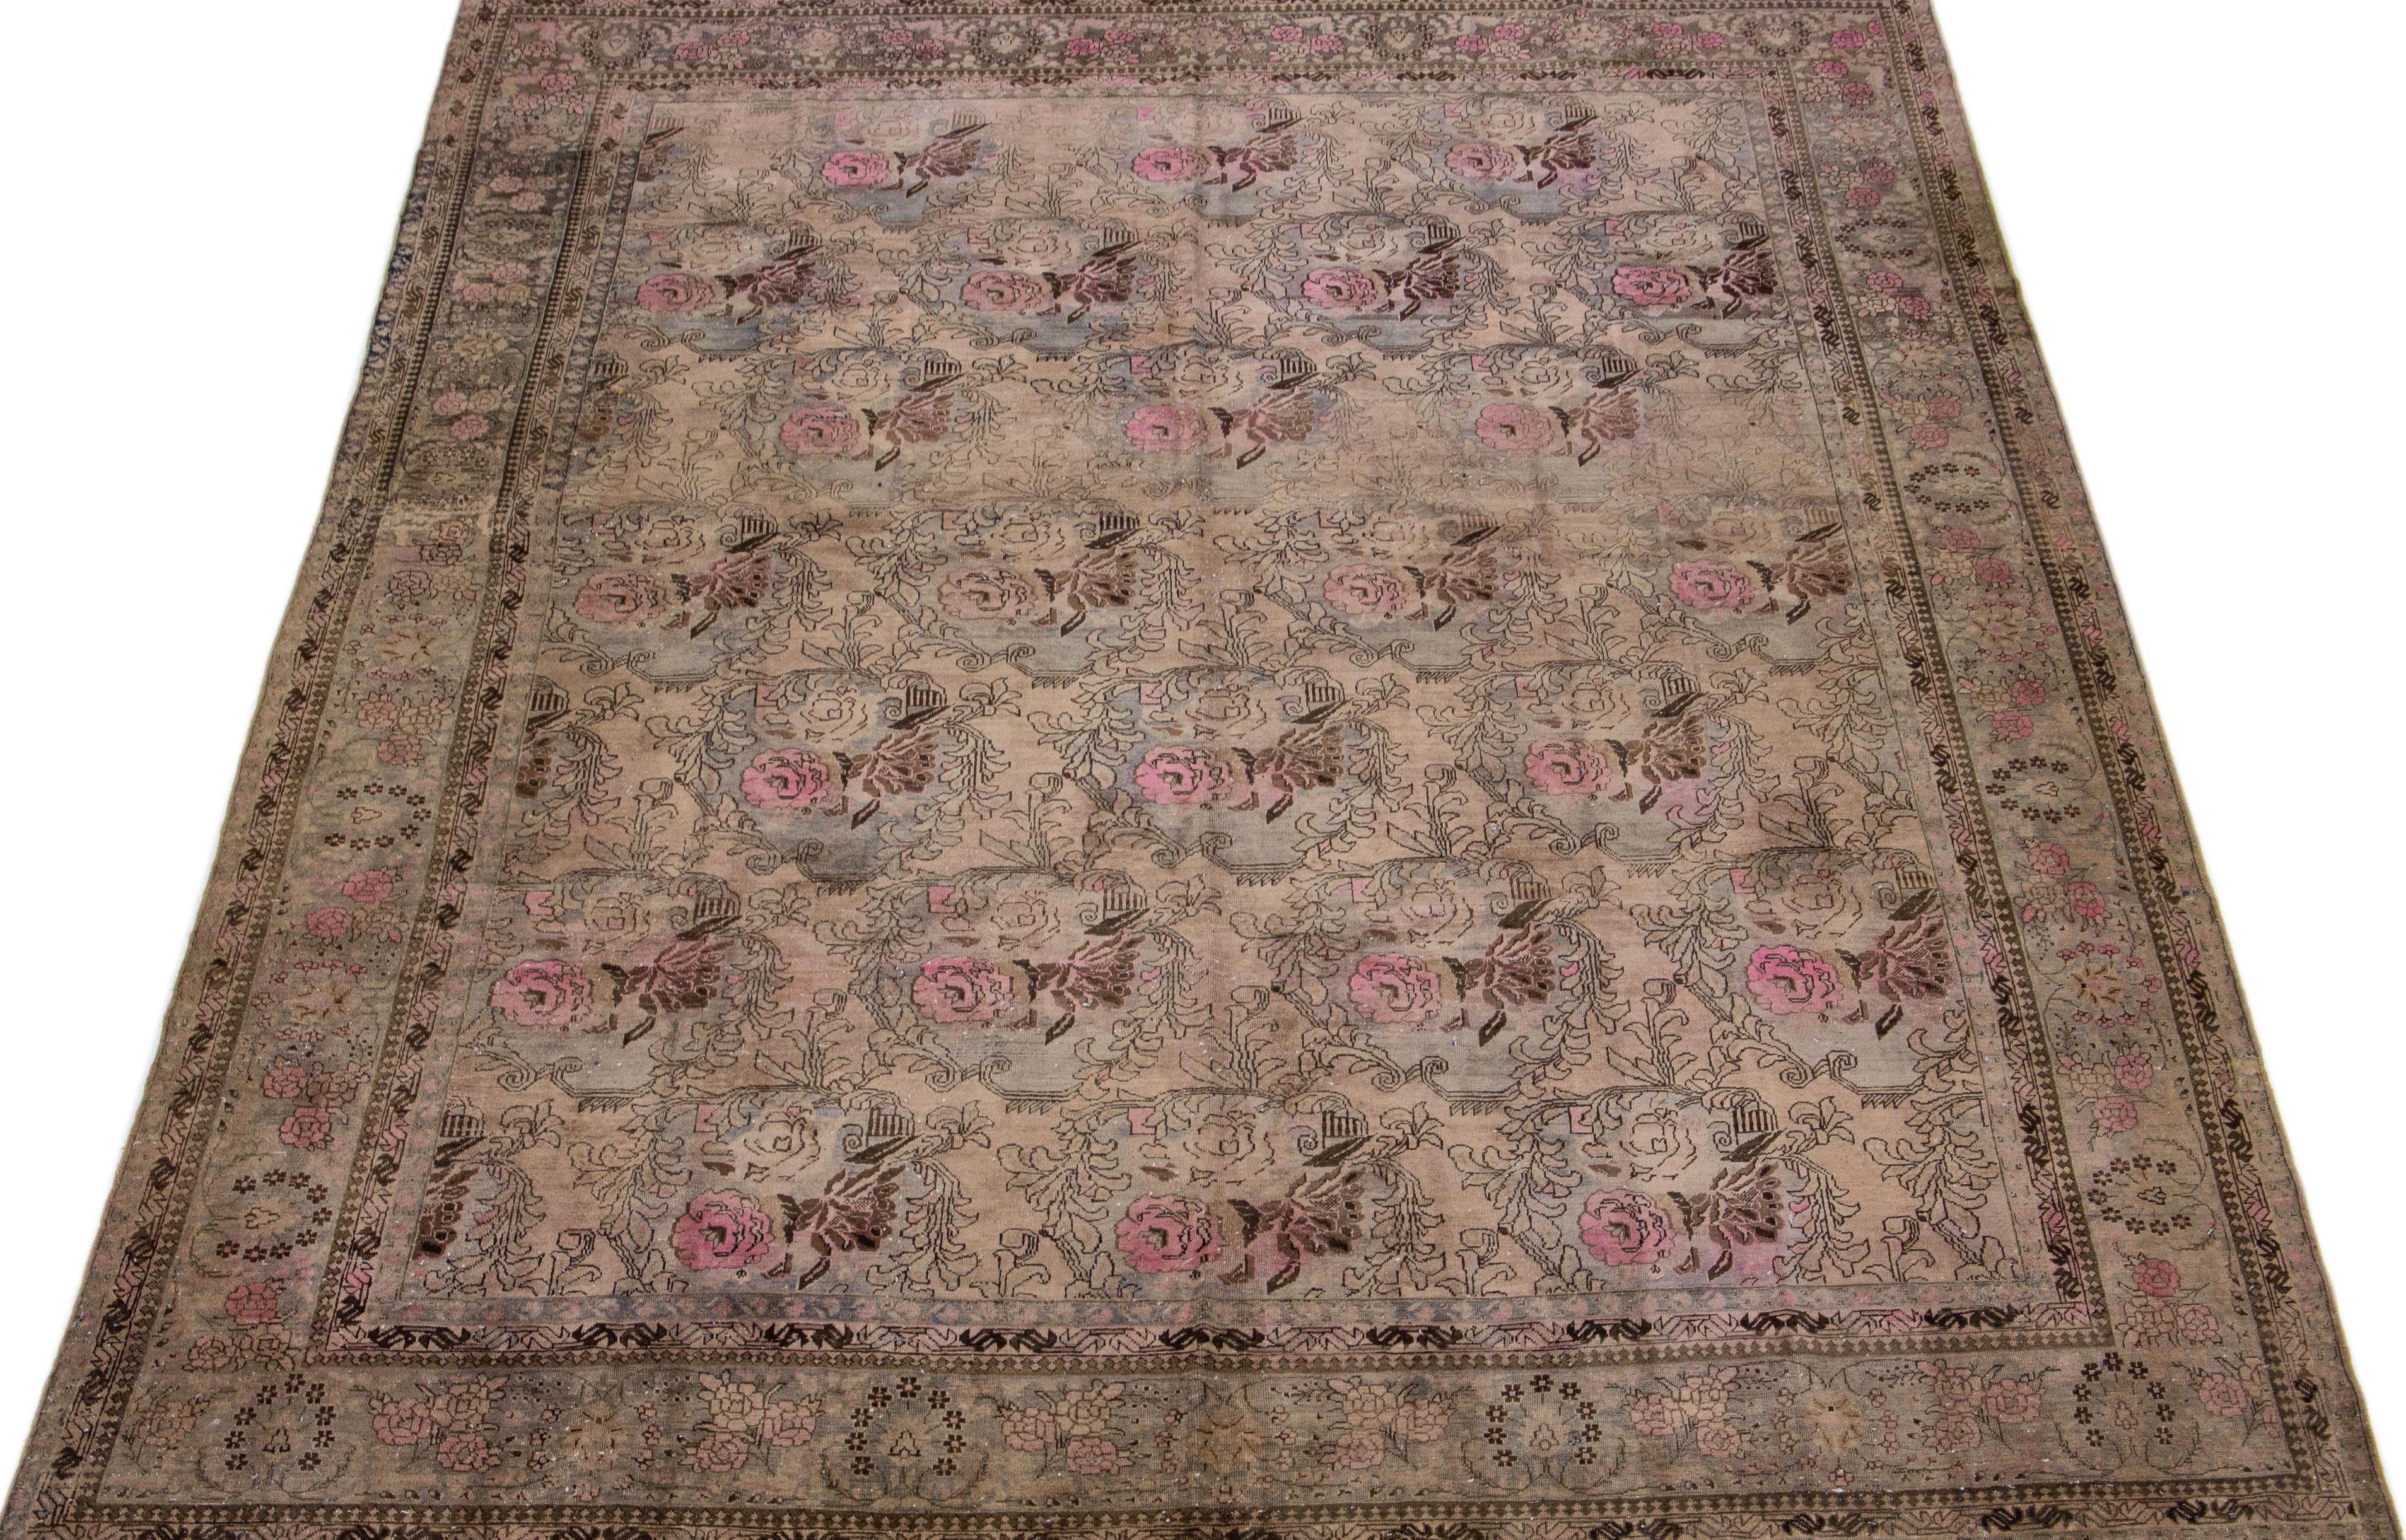 Beautiful antique Bidjar hand-knotted wool rug with a brown color field. This Persian rug has gray and pink accents in a gorgeous traditional floral design.

This rug measures 10'7